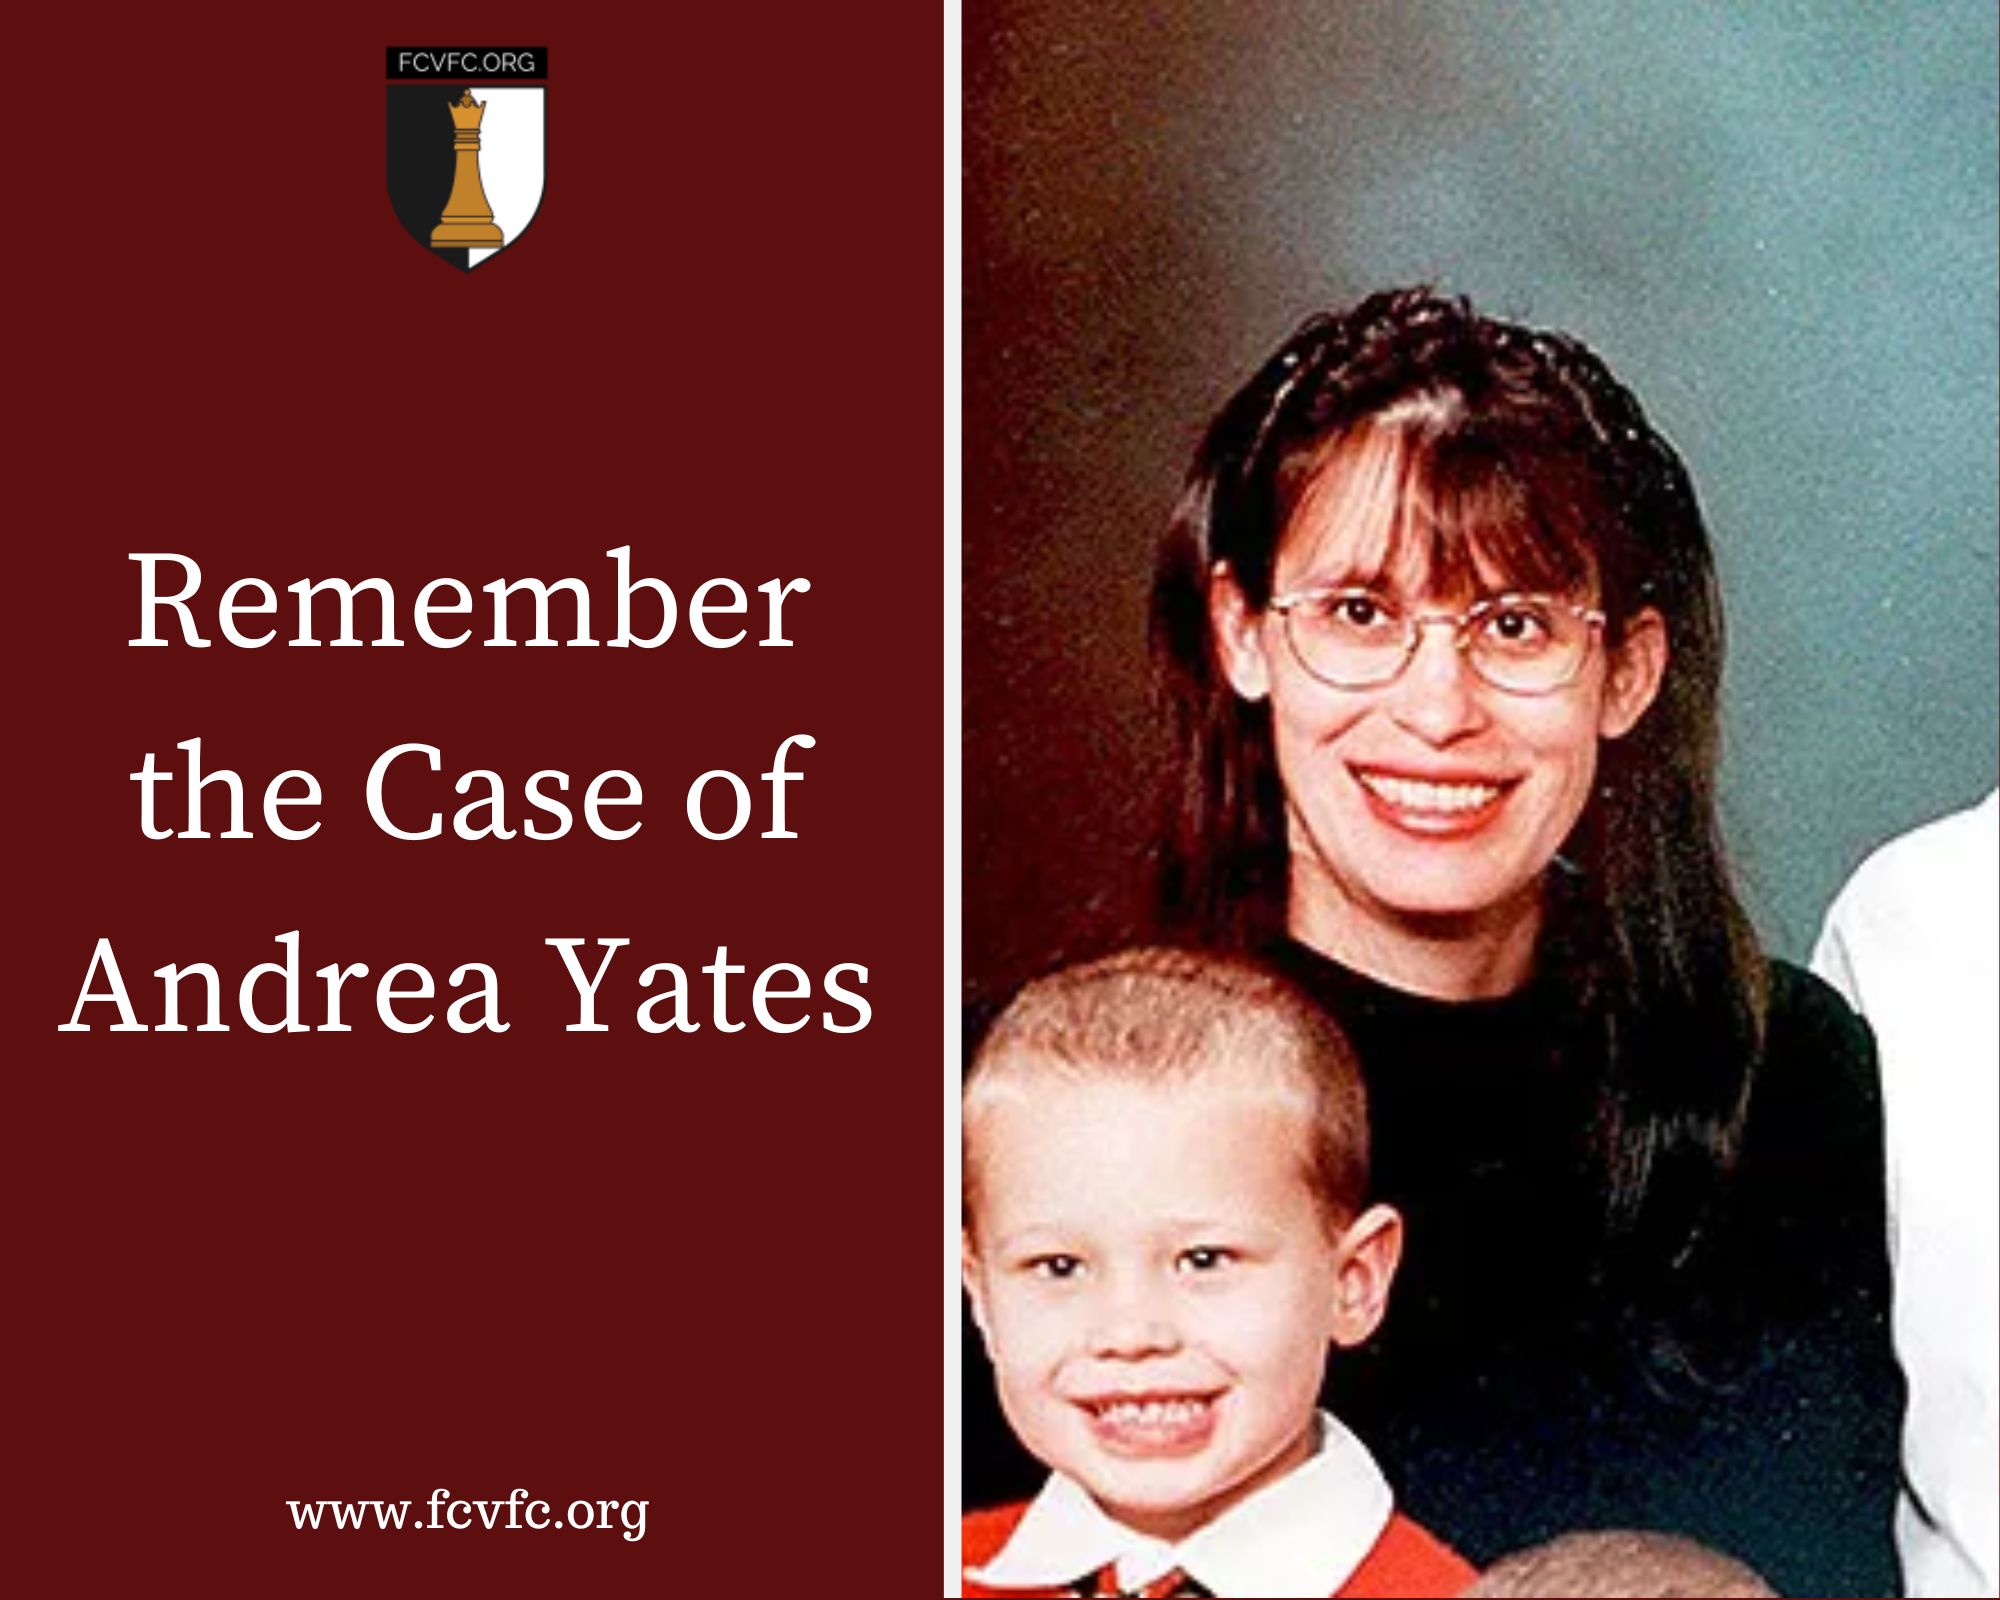 Remember the Case of Andrea Yates Foundation for Child Victims of the